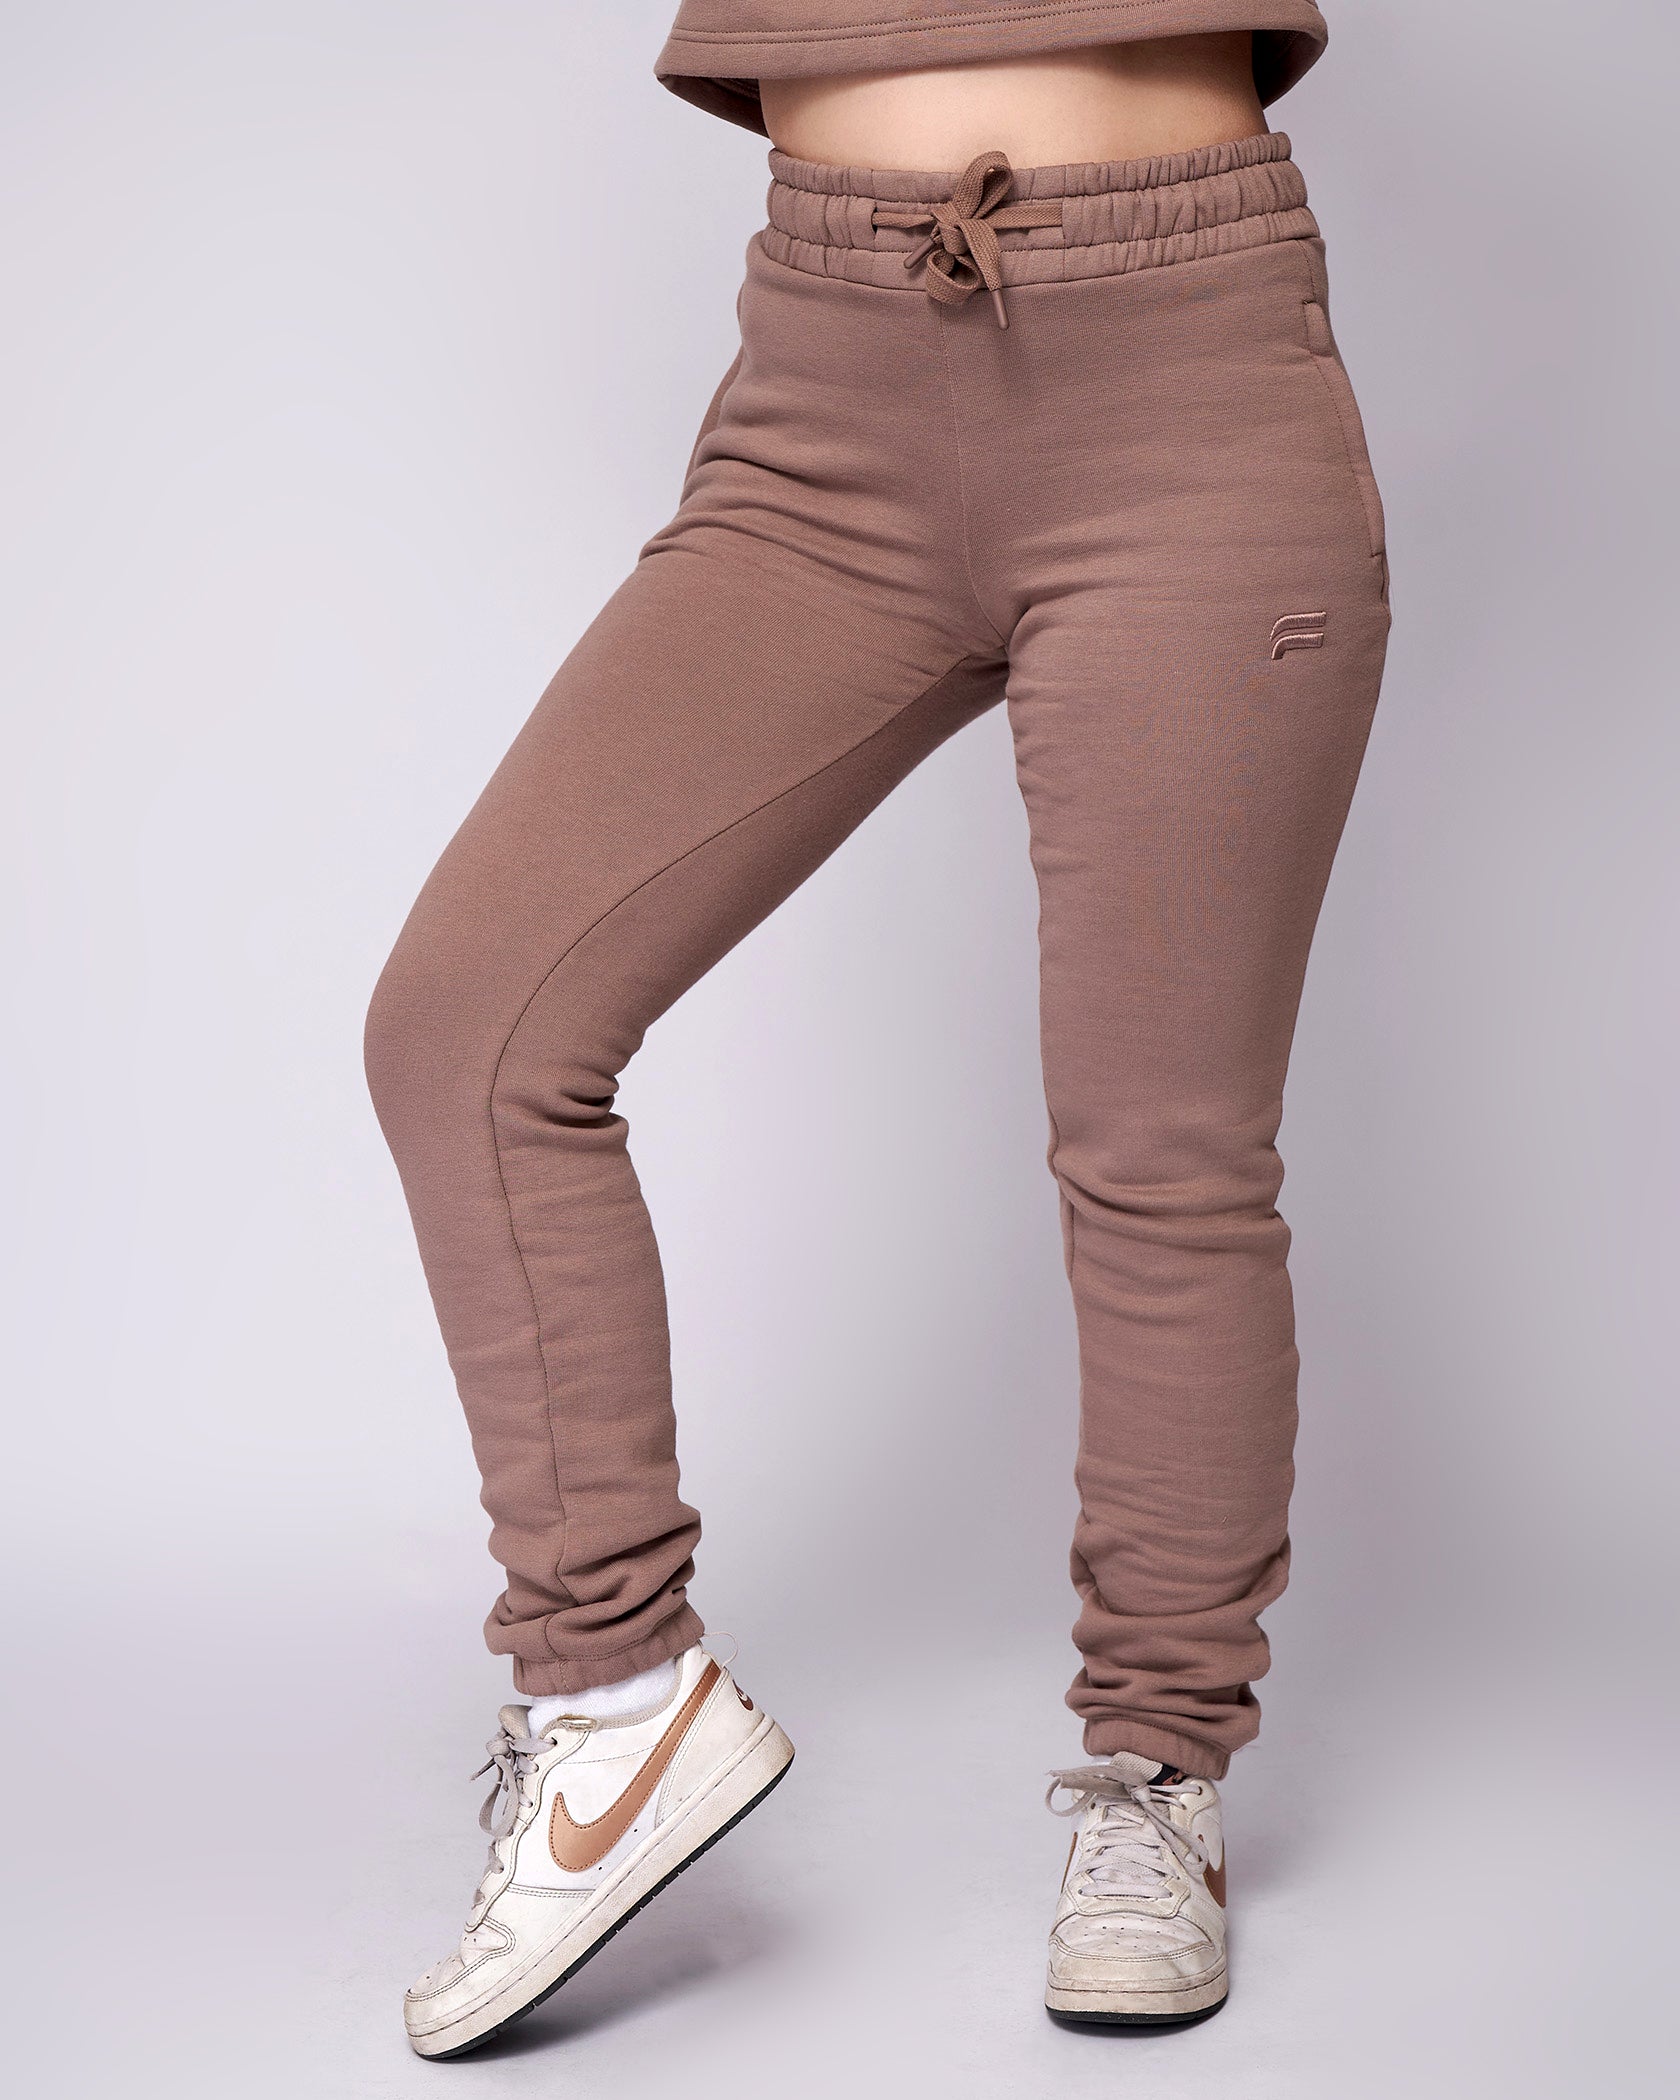 Essential Comfy Jogger - Rose Taupe - Fortex Fitness